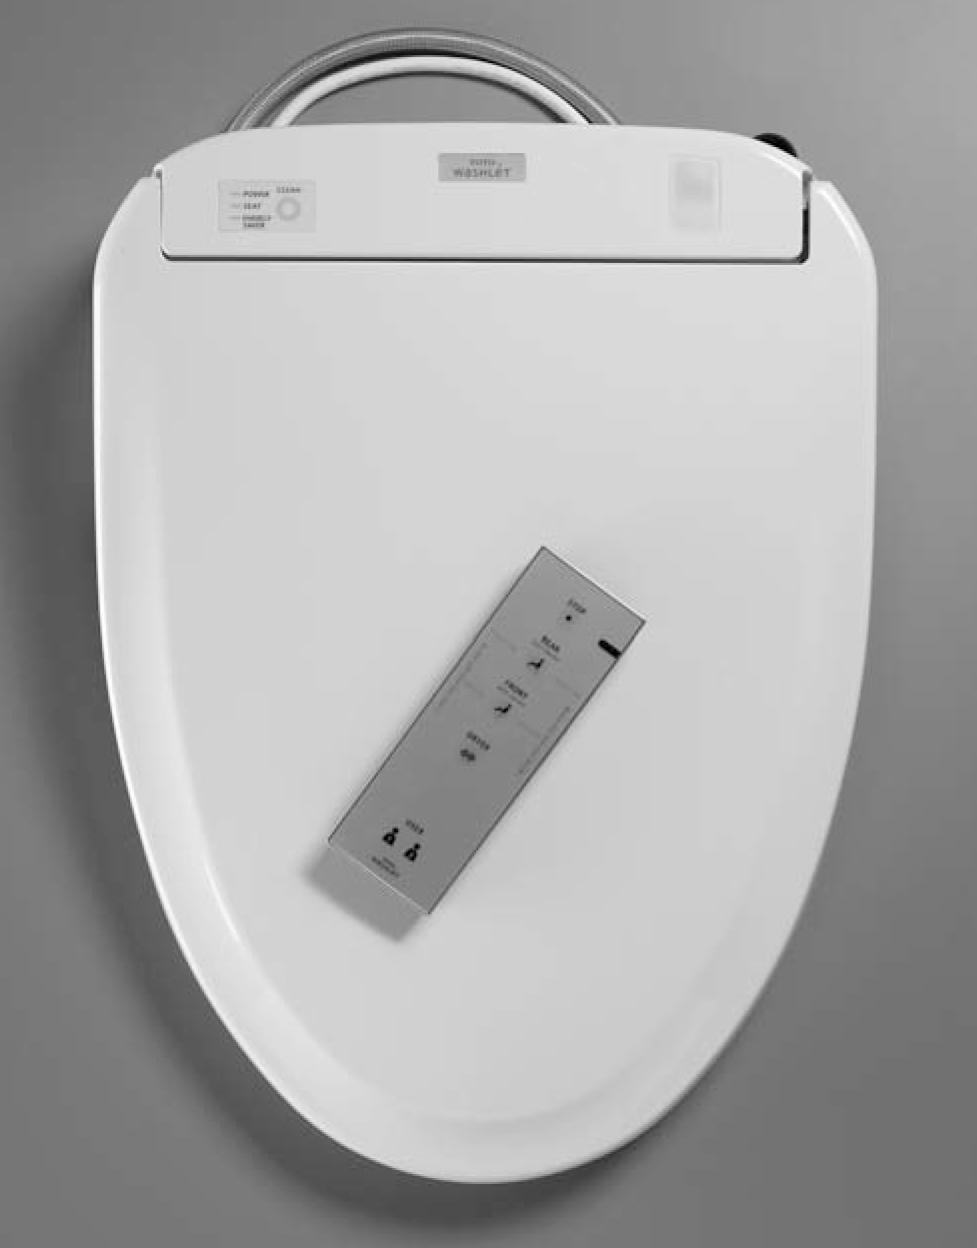 9 Toilet Seat Bidet Toilet Seat Bidet. Simply put, everyone who remodels their bathroom should install one of these!